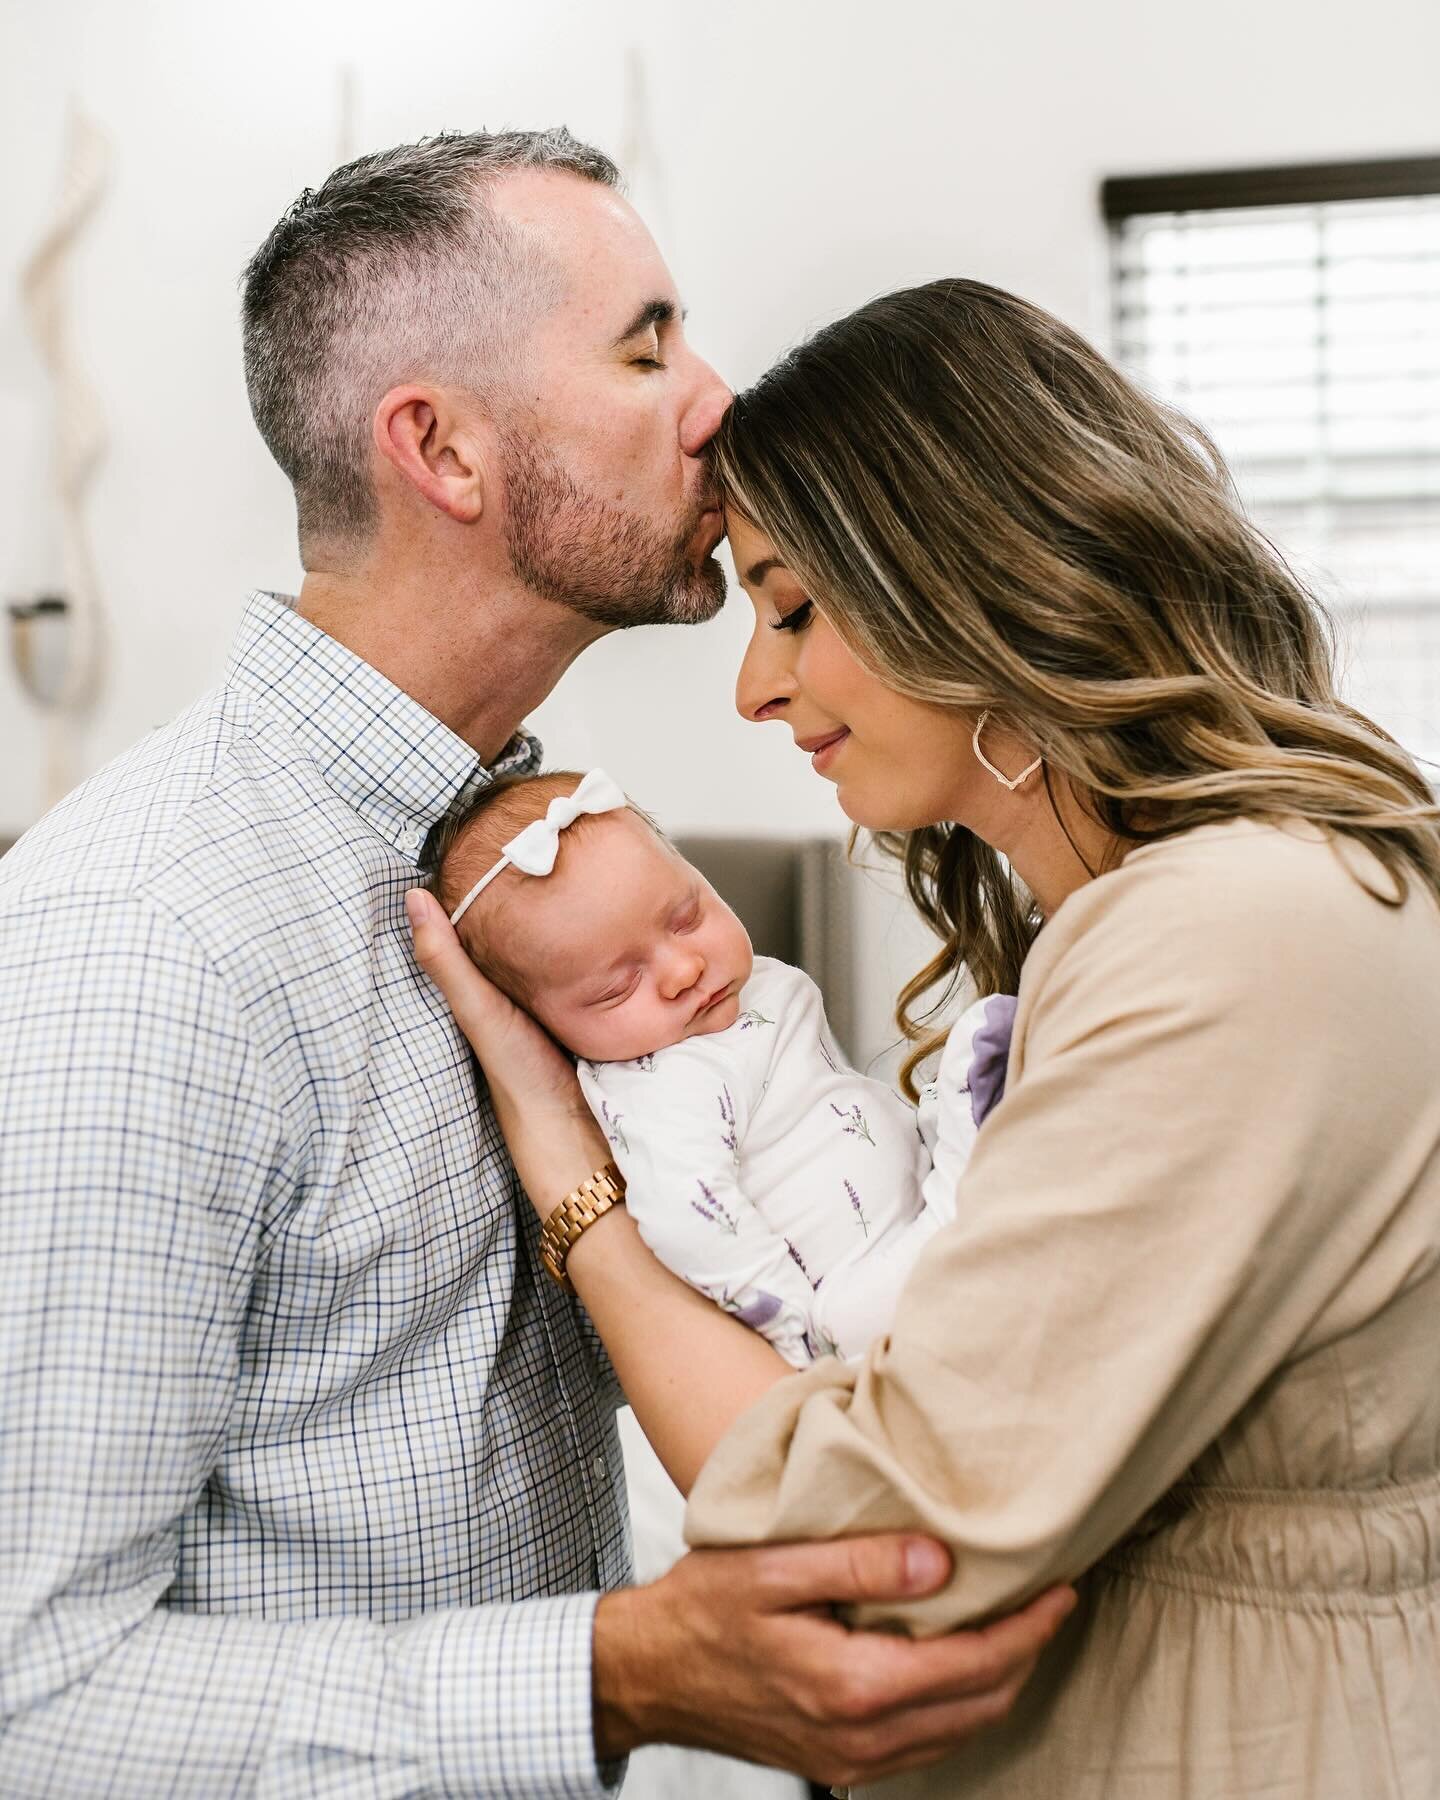 The sweetest lifestyle session! Just had to share the sneak peek of this beautiful family.